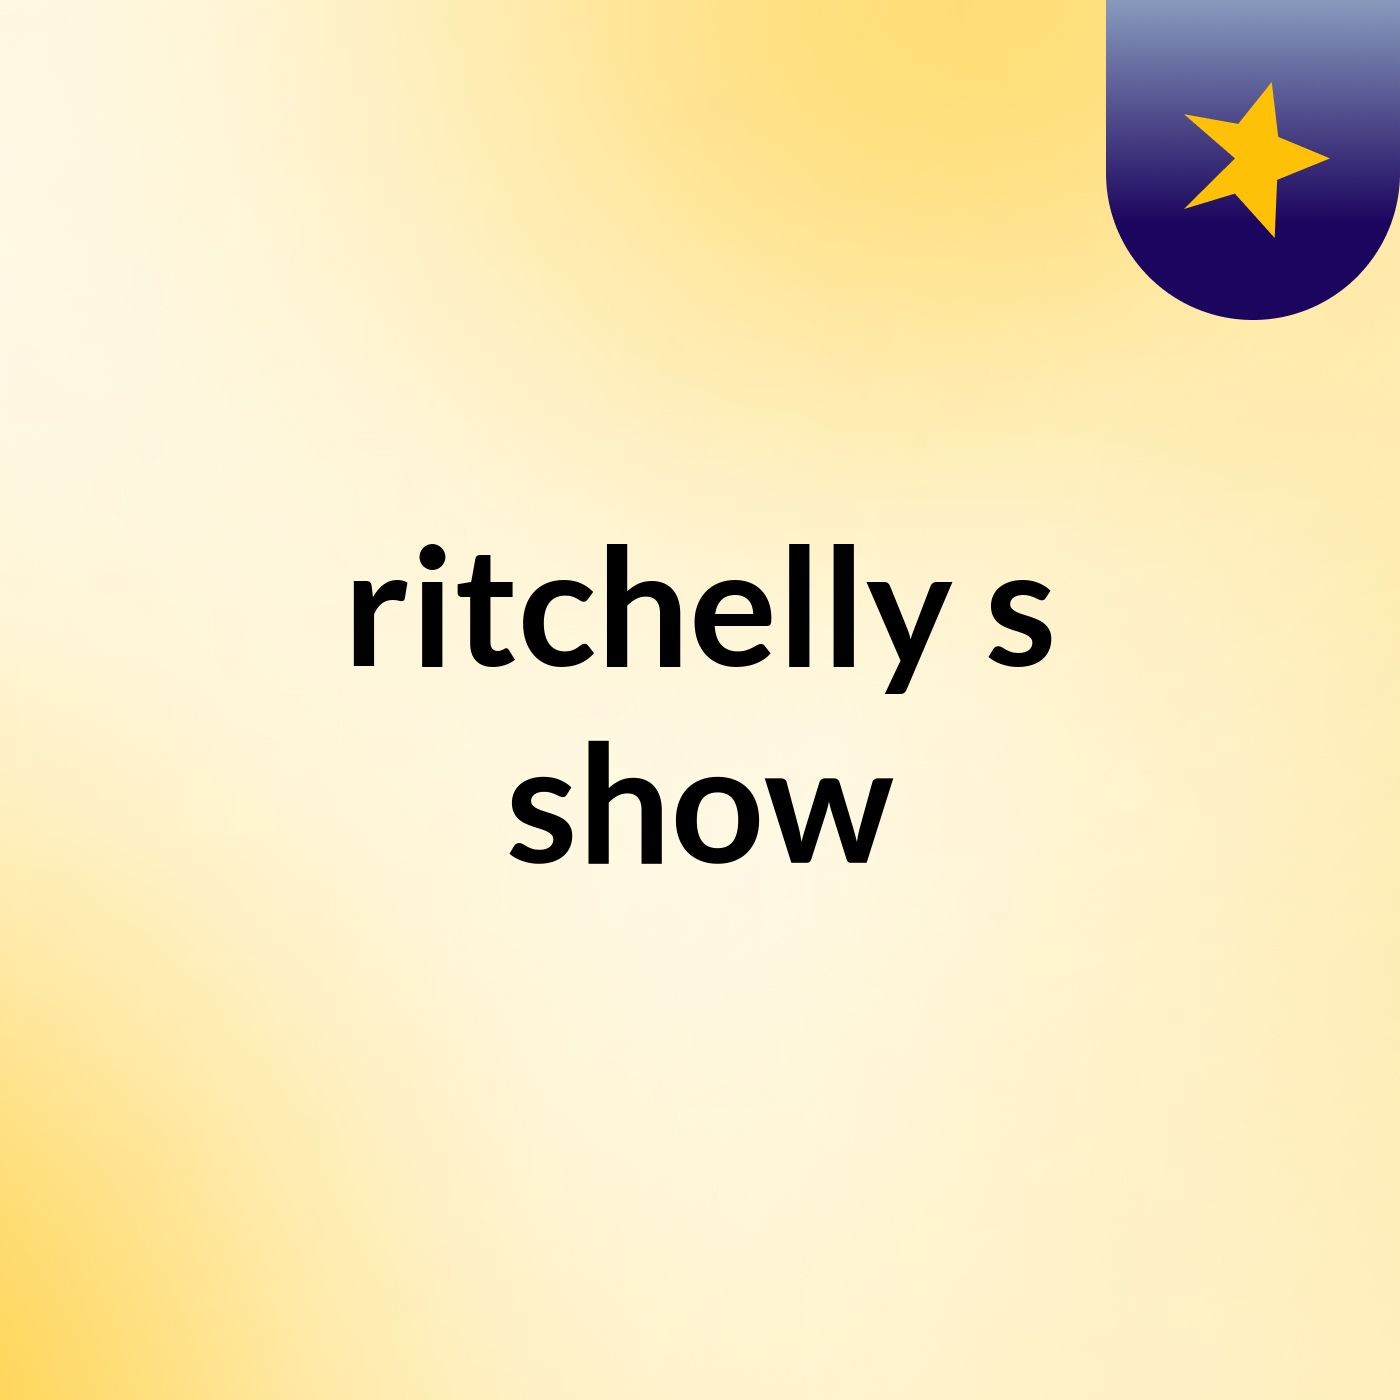 ritchelly's show